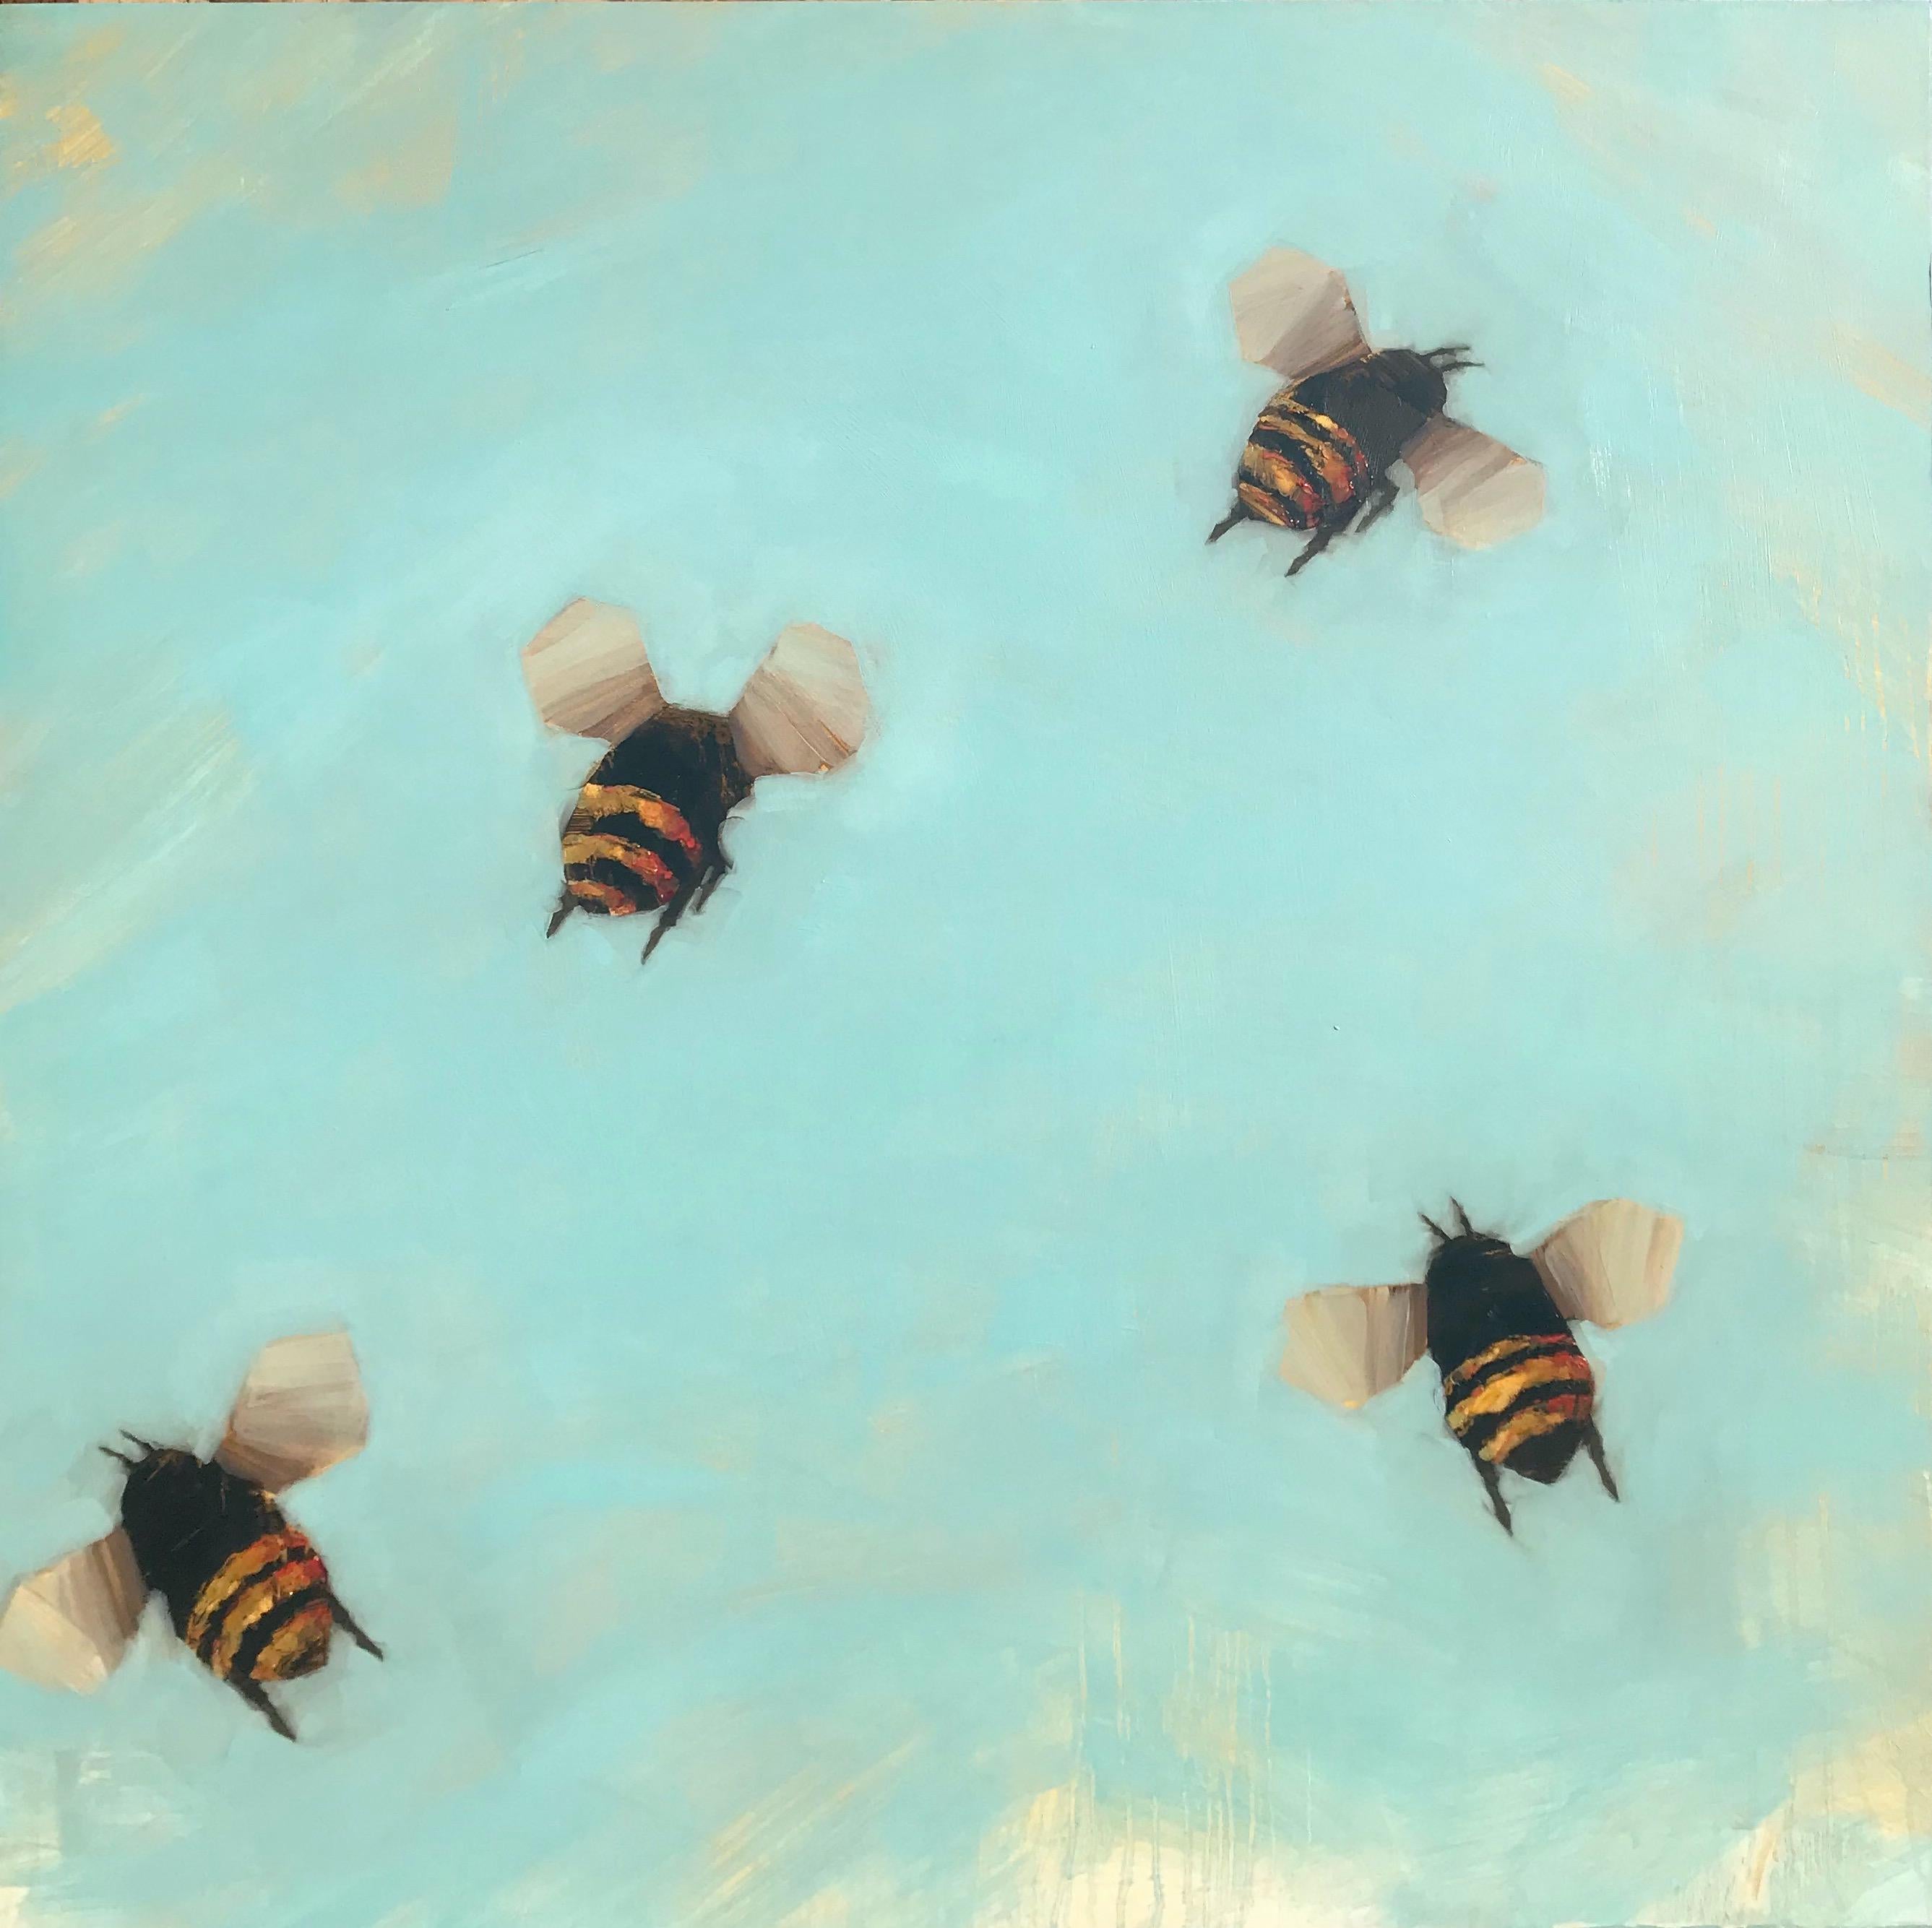 'Bees 1-74' is a large oil on board painting of square format created by American artist Angie Renfro in 2019. Represented on a soft blue background, four honey bees are busy flying around, scouting the environment. They are in search of flowers and